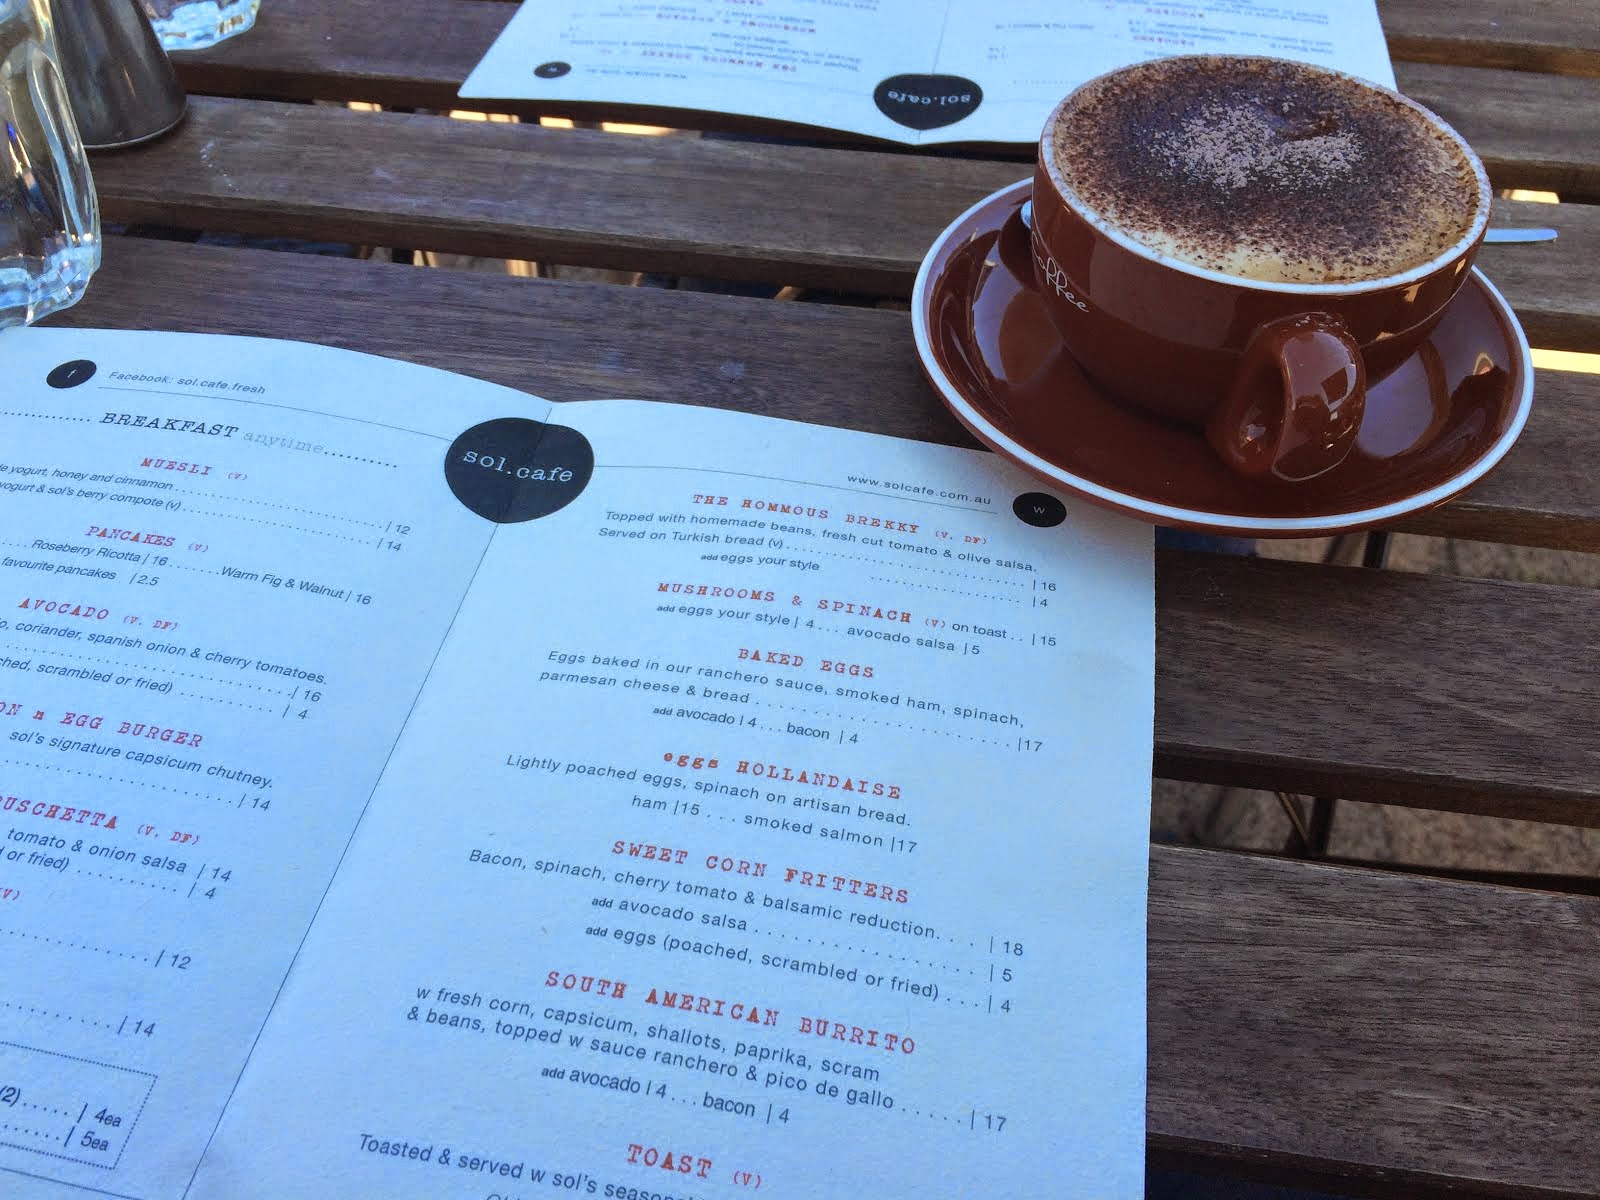 Reviewing cafes in Sydney's suburbs